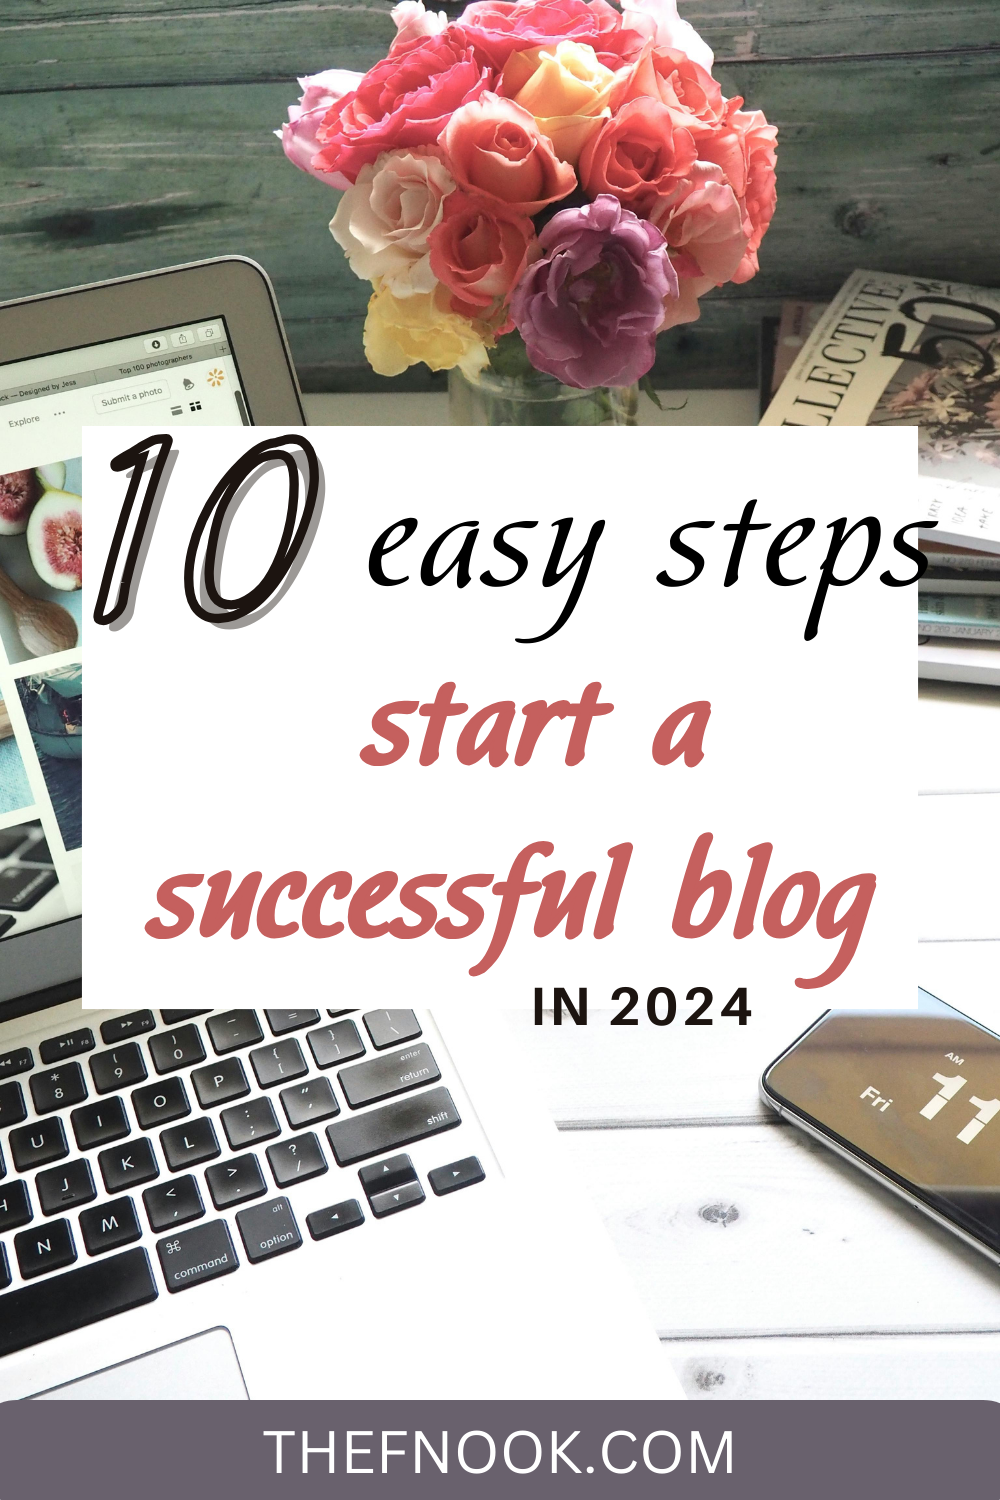 10 Easy Steps to Start a Successful Blog in 2024